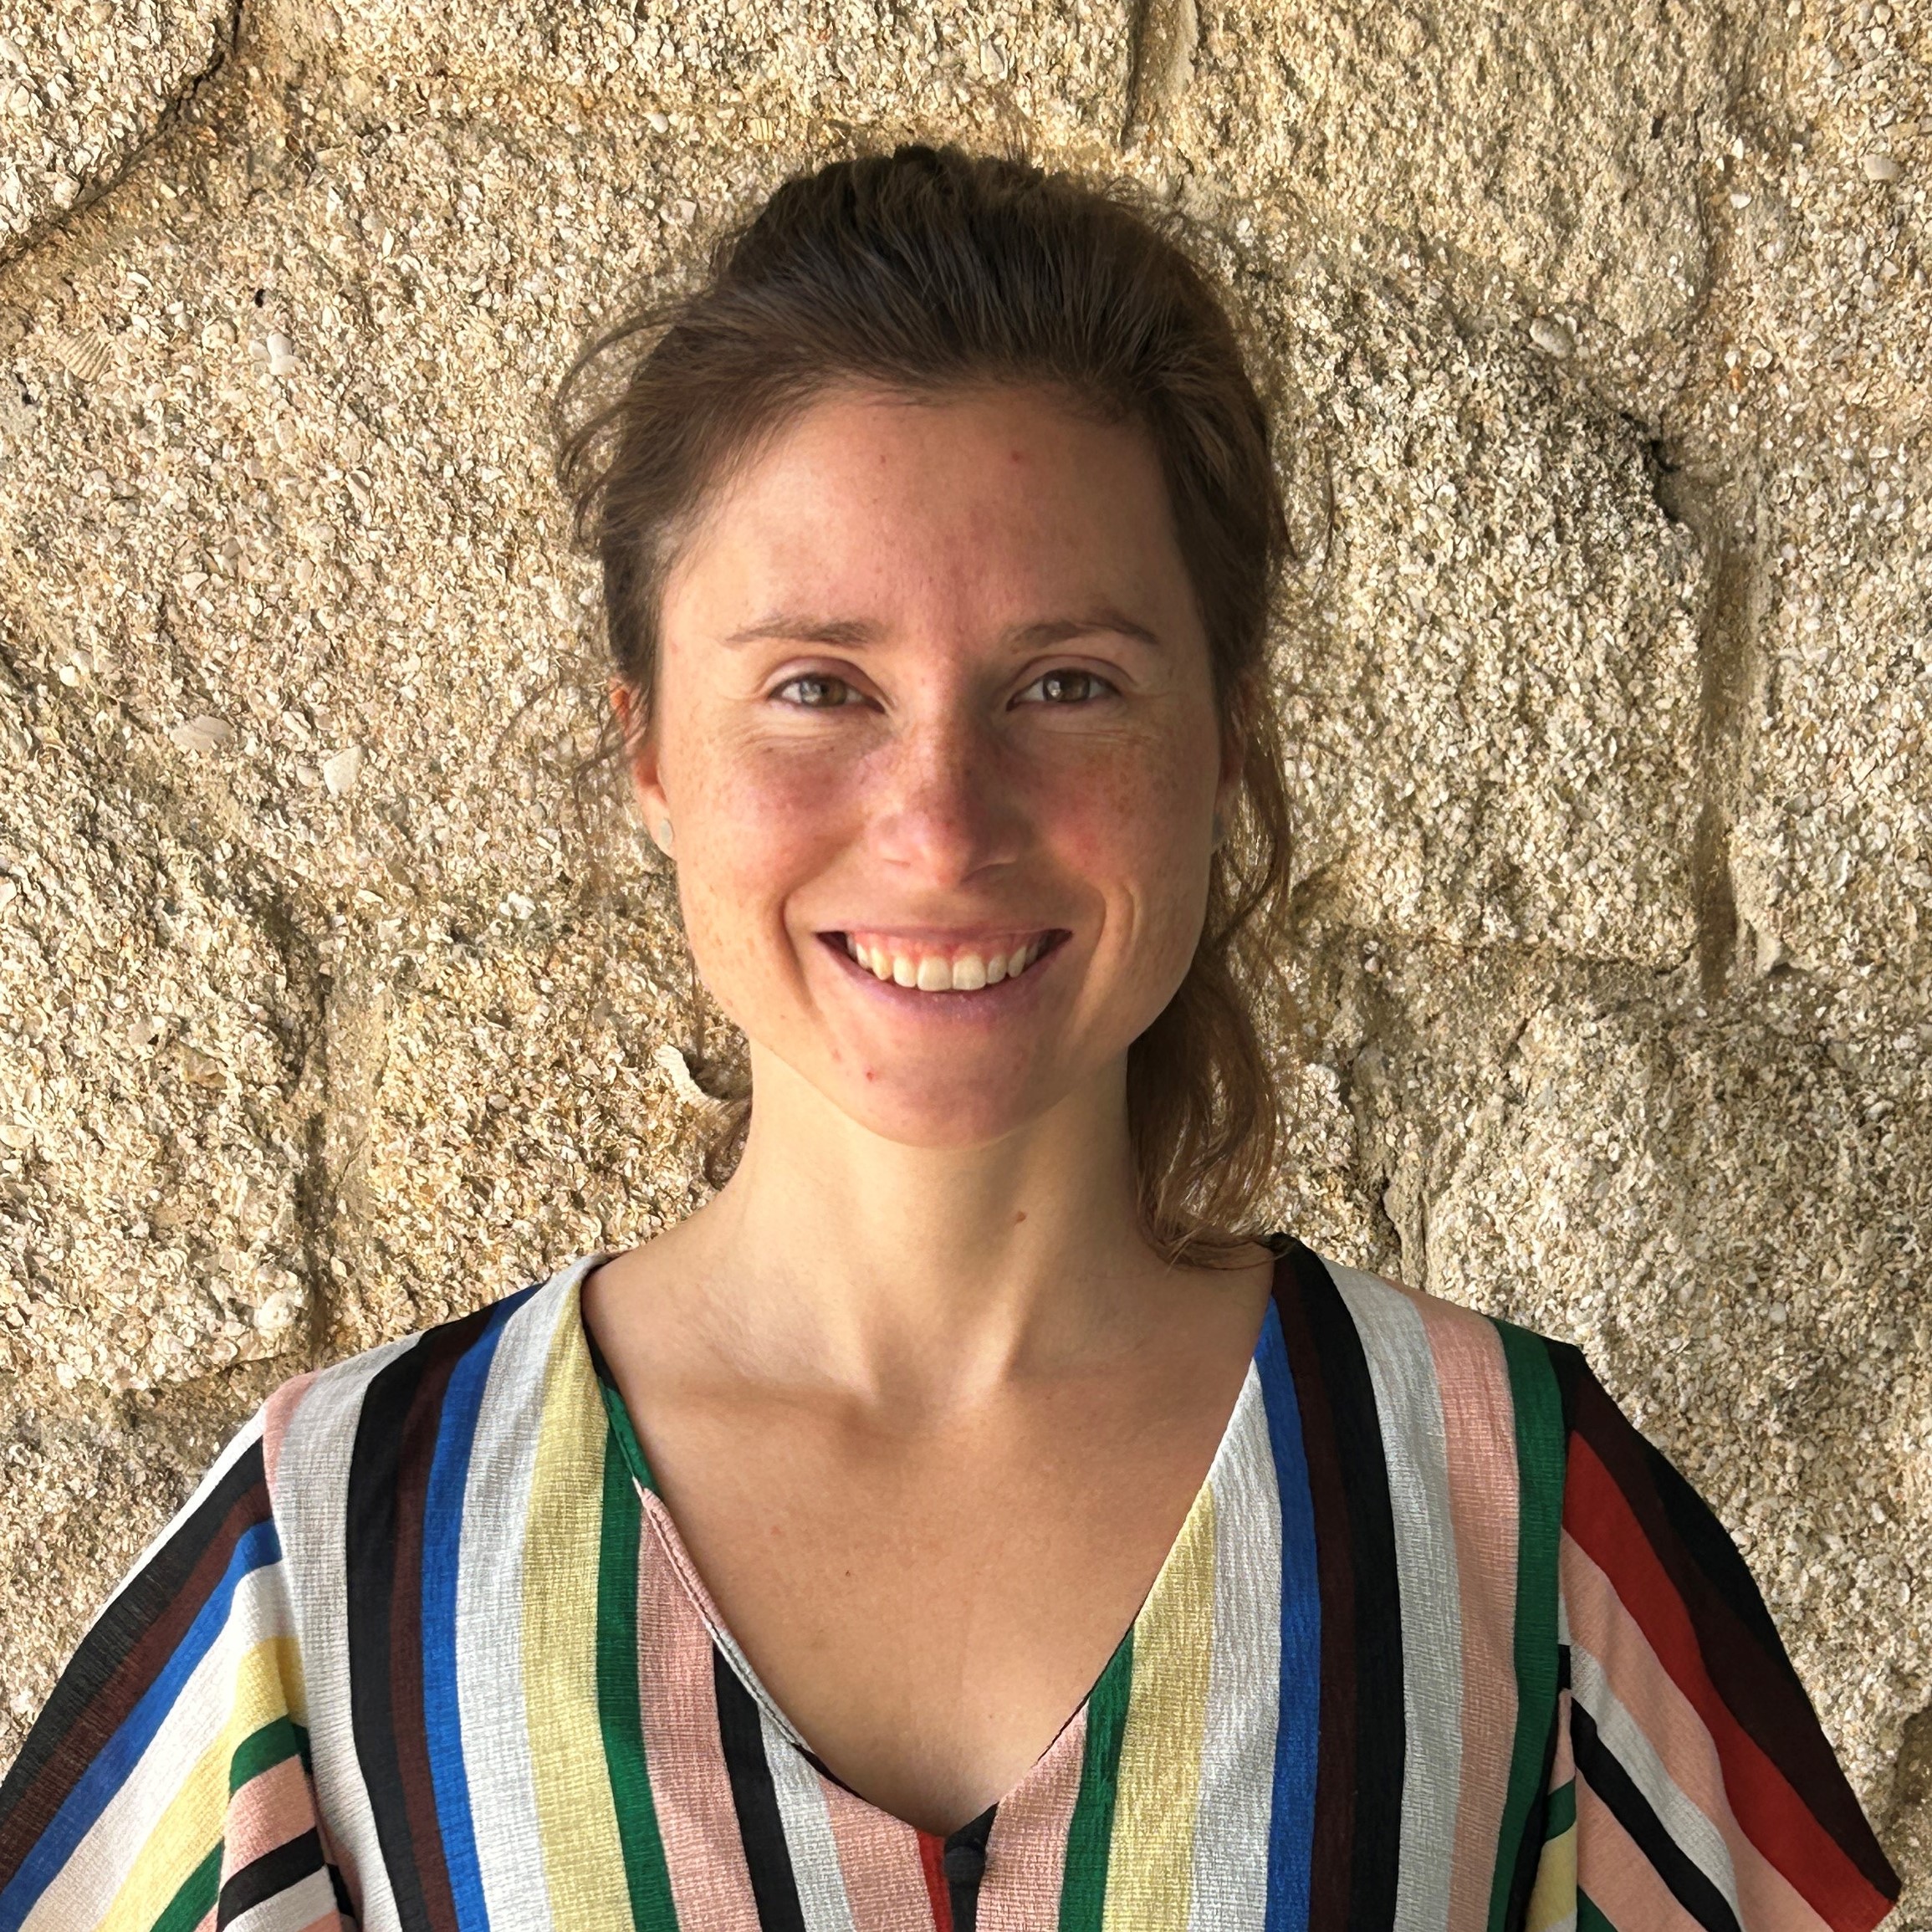 Strother Lab welcomes Dr. Leandra Hamann